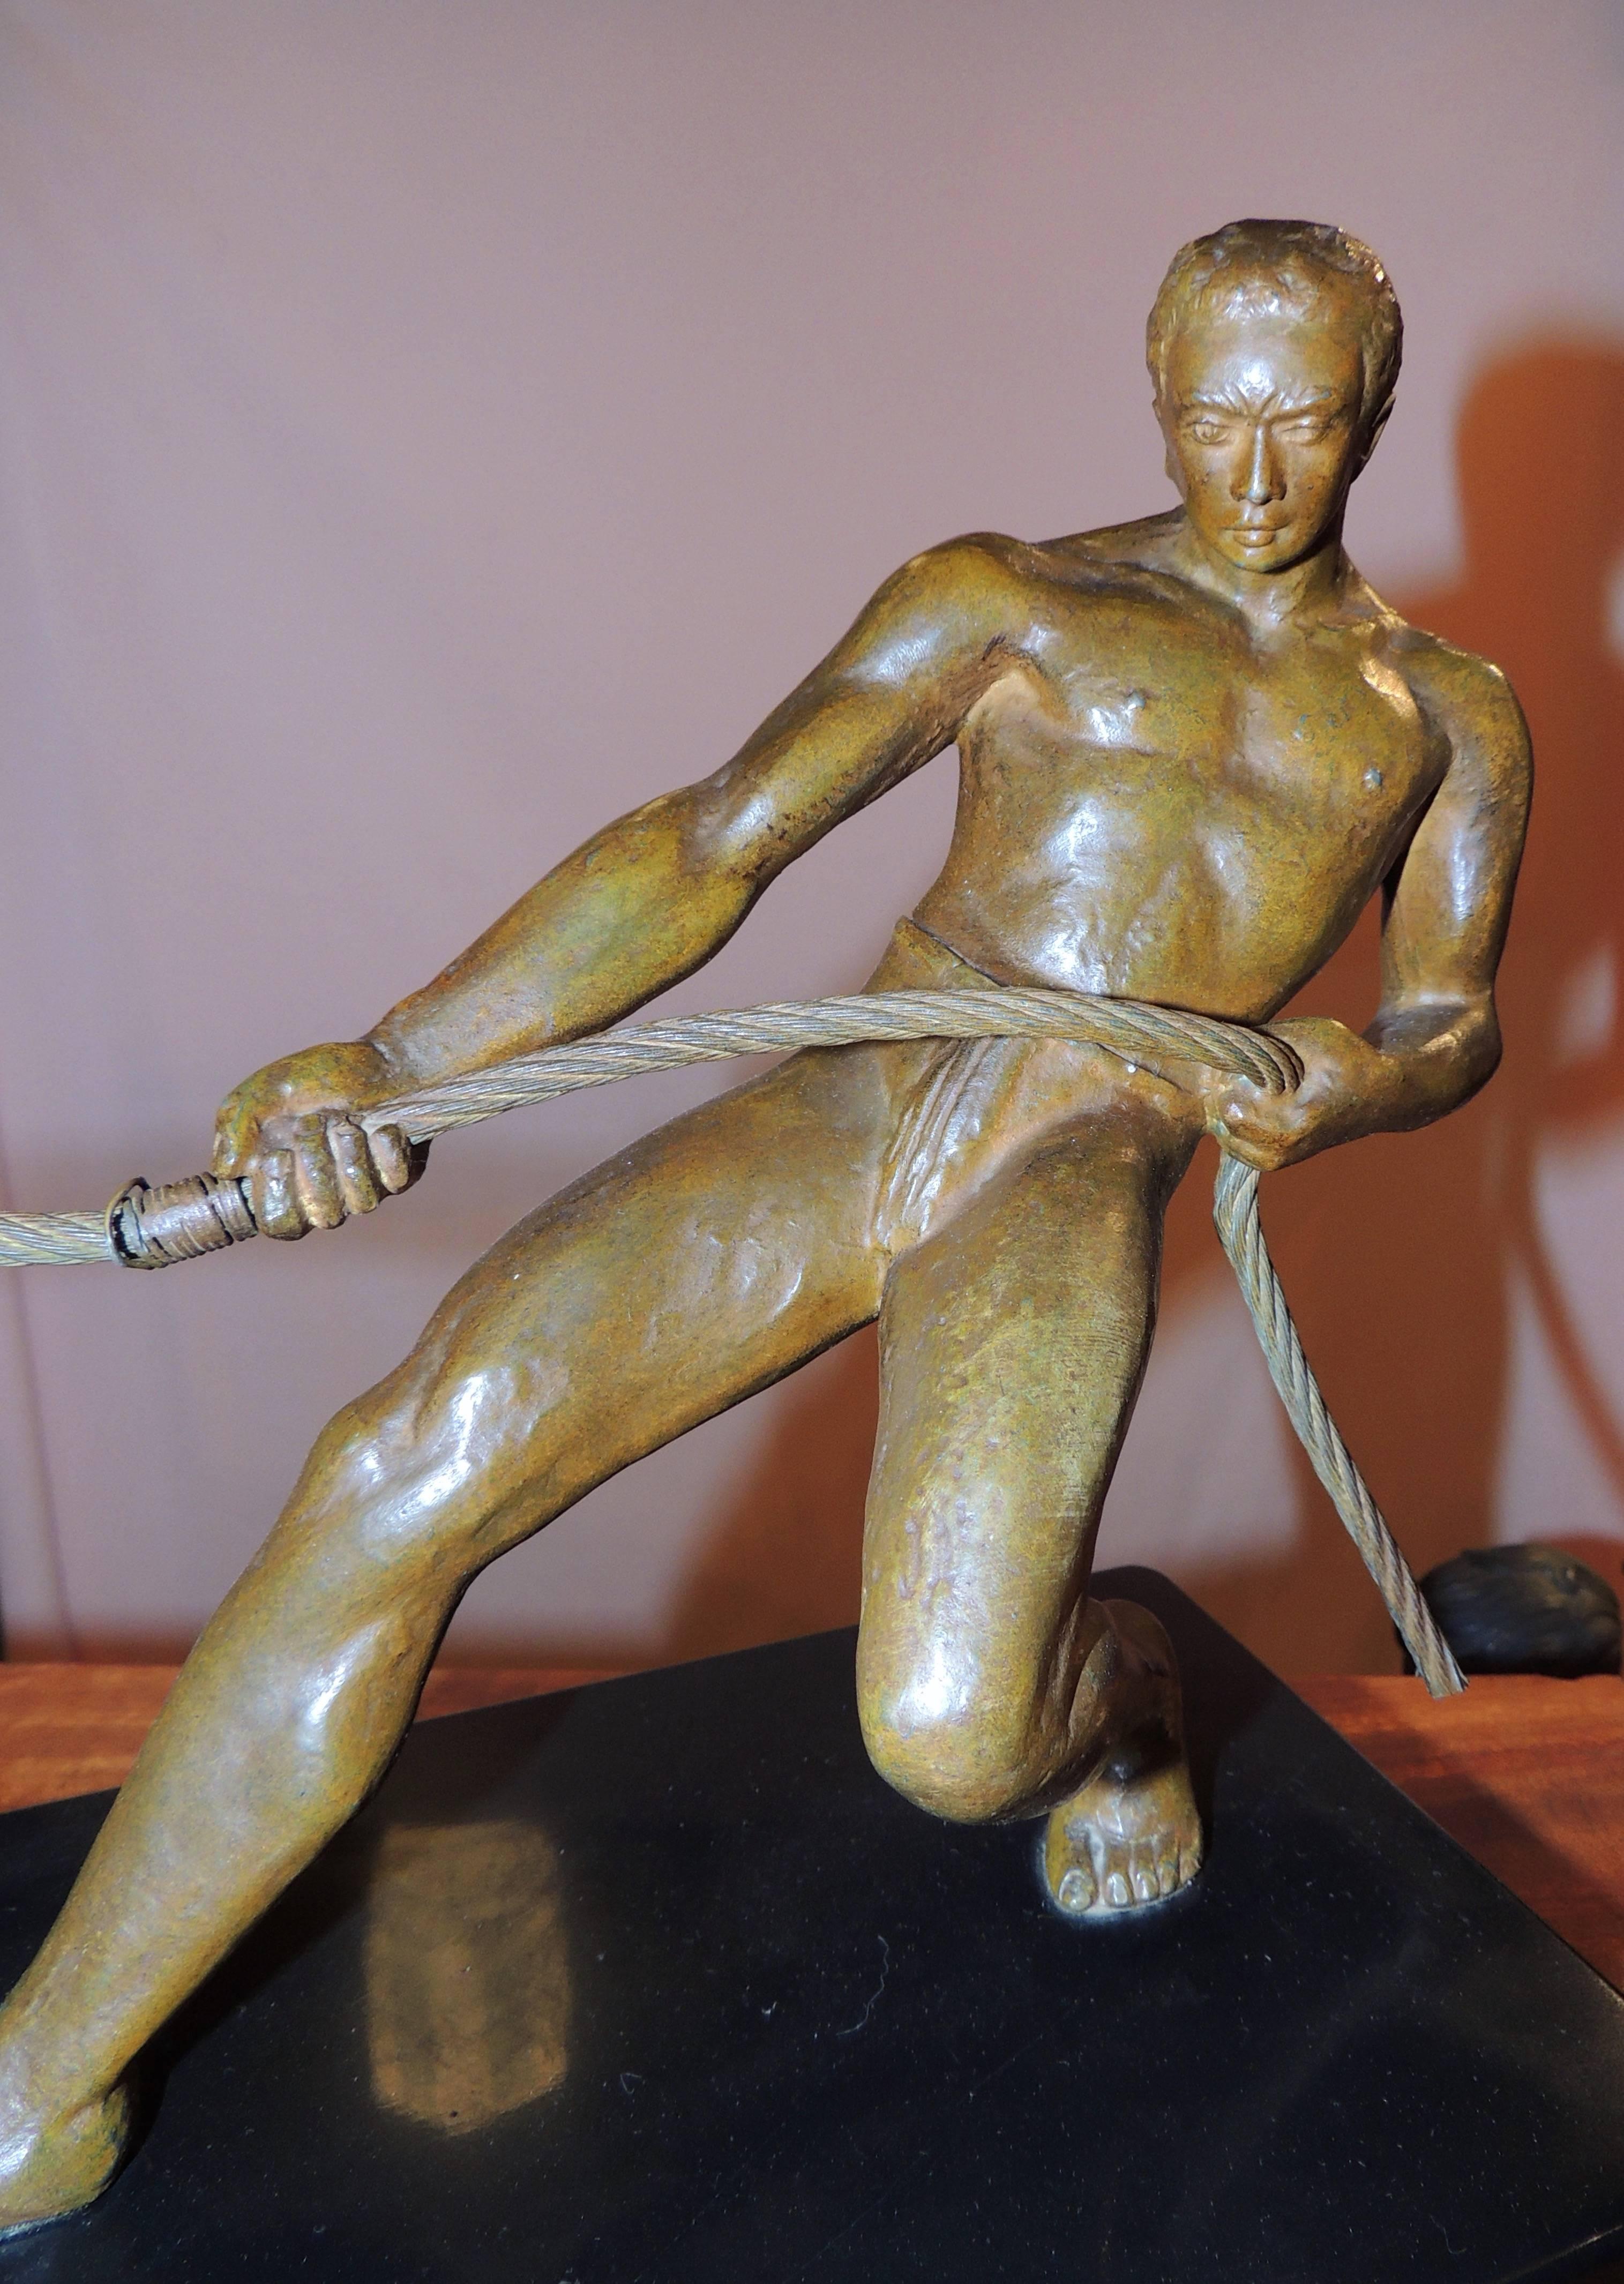 An Art Deco bronze sculpture of a man gripping a rope and pulling a row boat ashore, It is a strong and unusual image, in contrast to the many images of men throwing spears or bending steel, this uses a section of the boat to create the dynamic